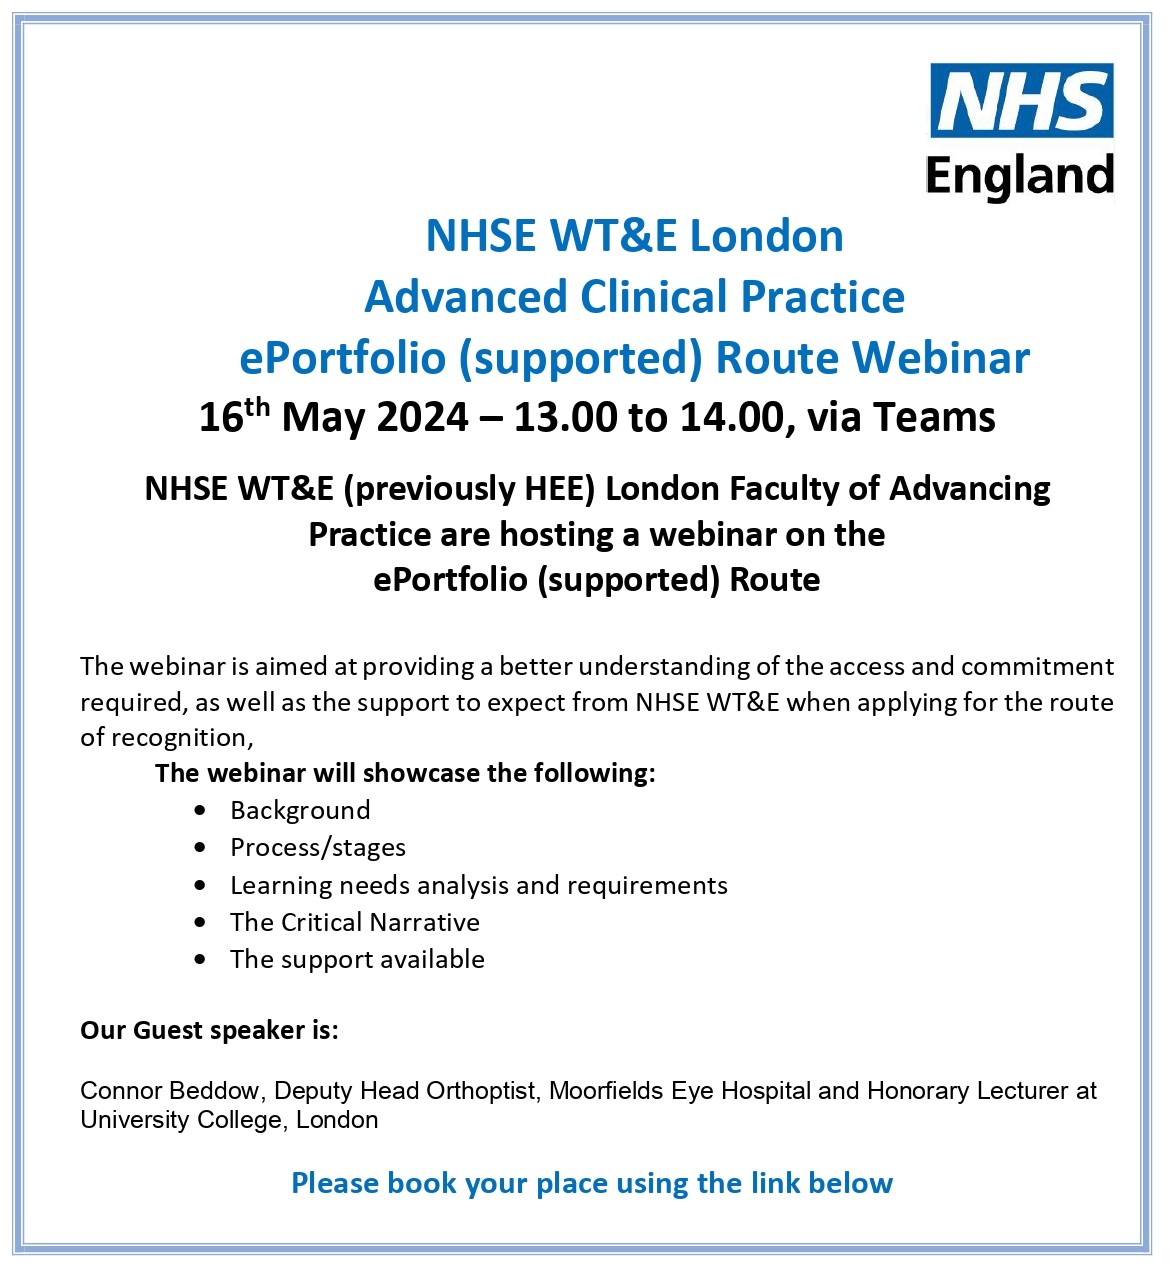 NHSE WT&E London Advanced Clinical Practice ePortfolio (supported) Route Webinar